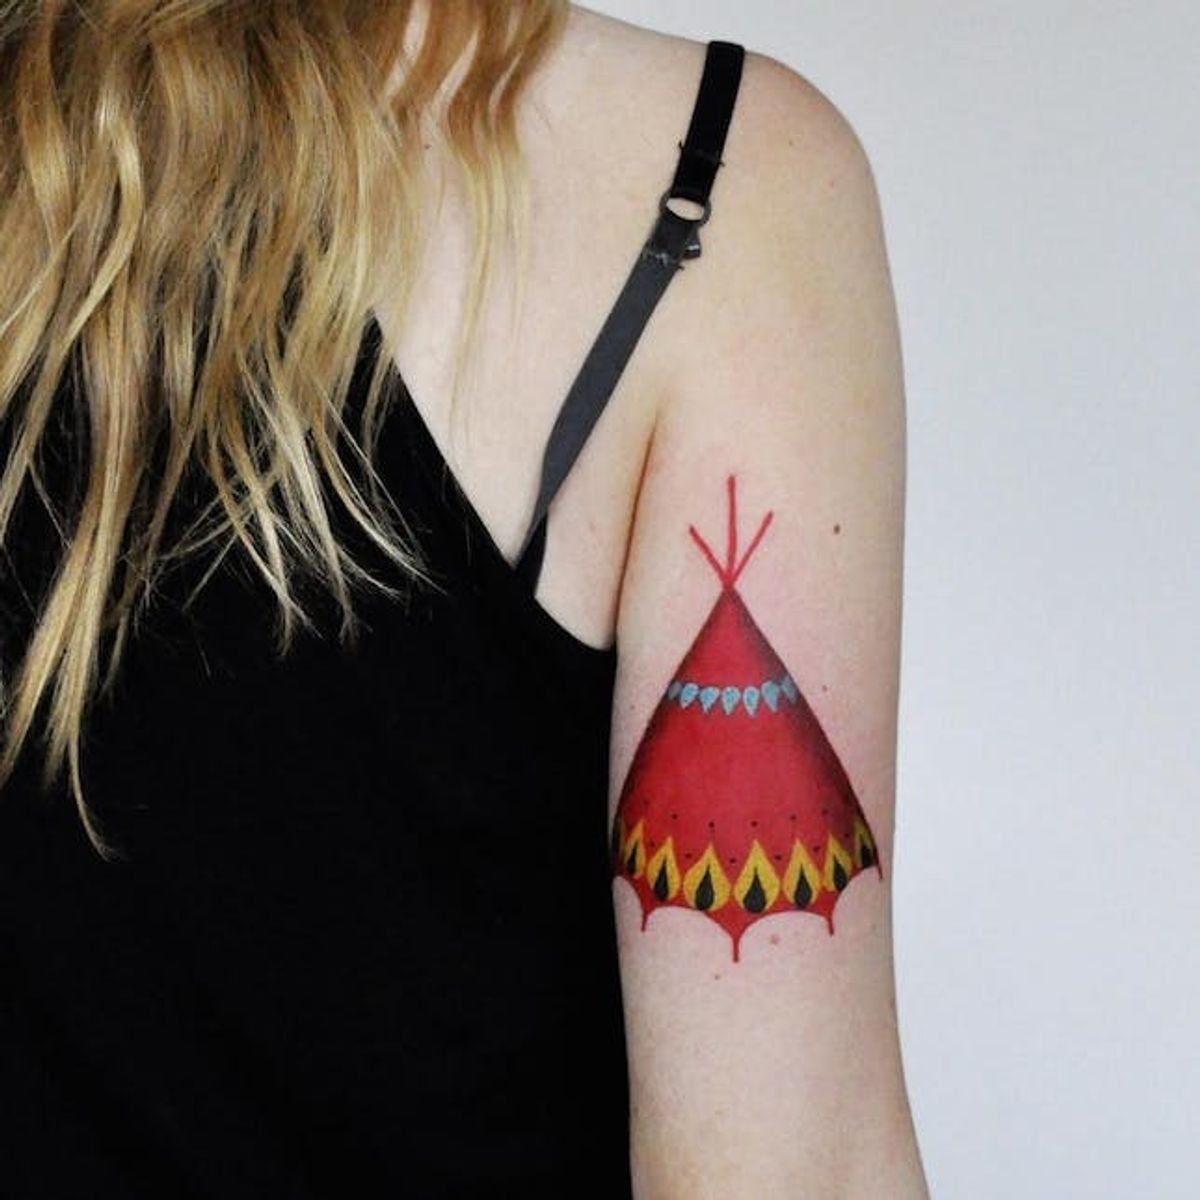 This Tattoo Artist’s Bold + Dramatic Designs Are EVERYTHING